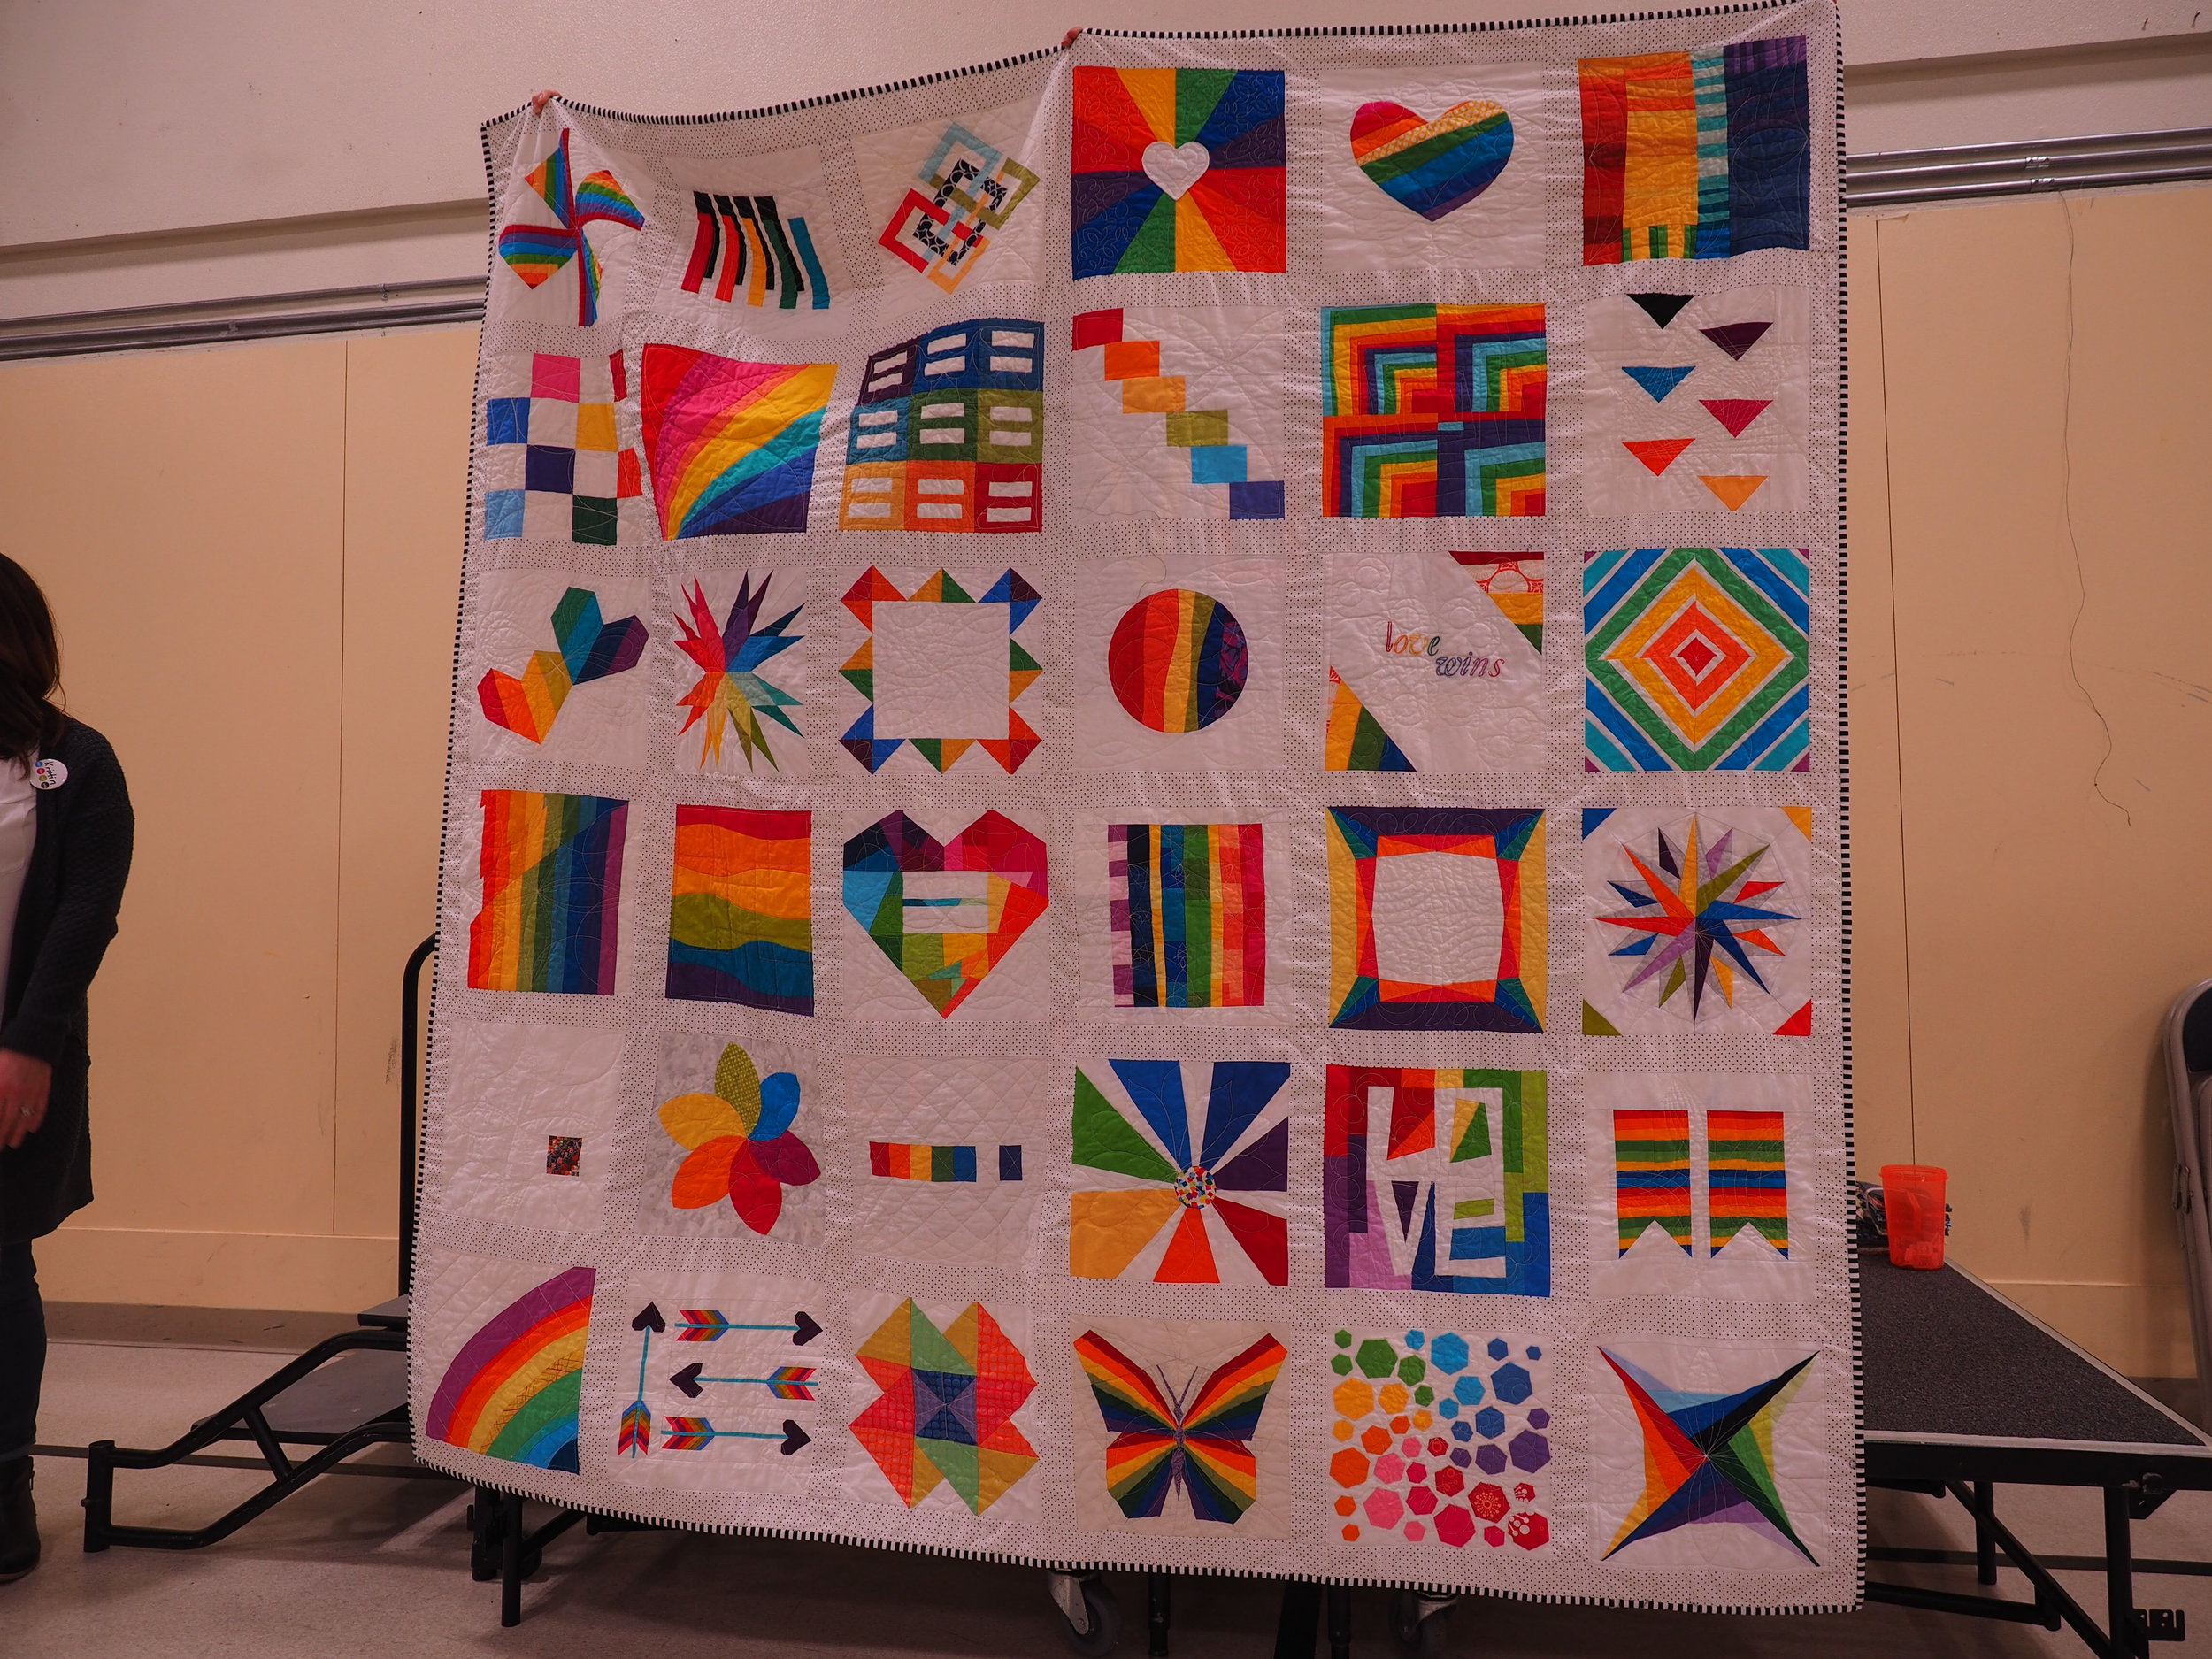  Kristin Link  #lovewins   @sewmamasew   Quilted by Charlene Trieloff 